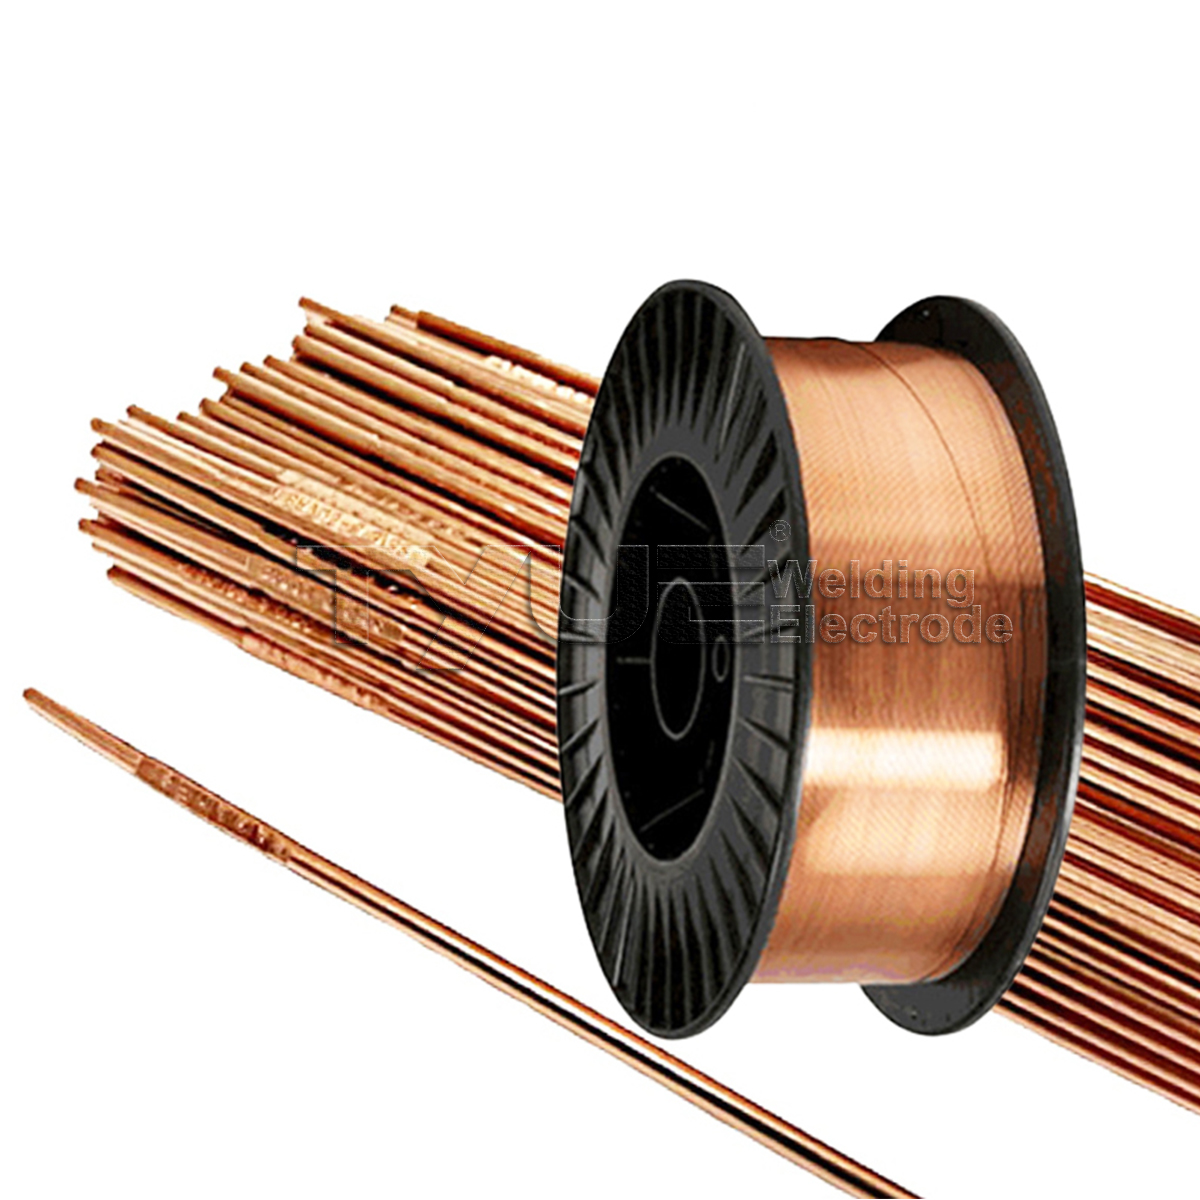 AWS A5.18 ER70S-6 Carbon Steel Welding Wire Filler Metals for Gas Shielded Arc Welding, Solid Wires